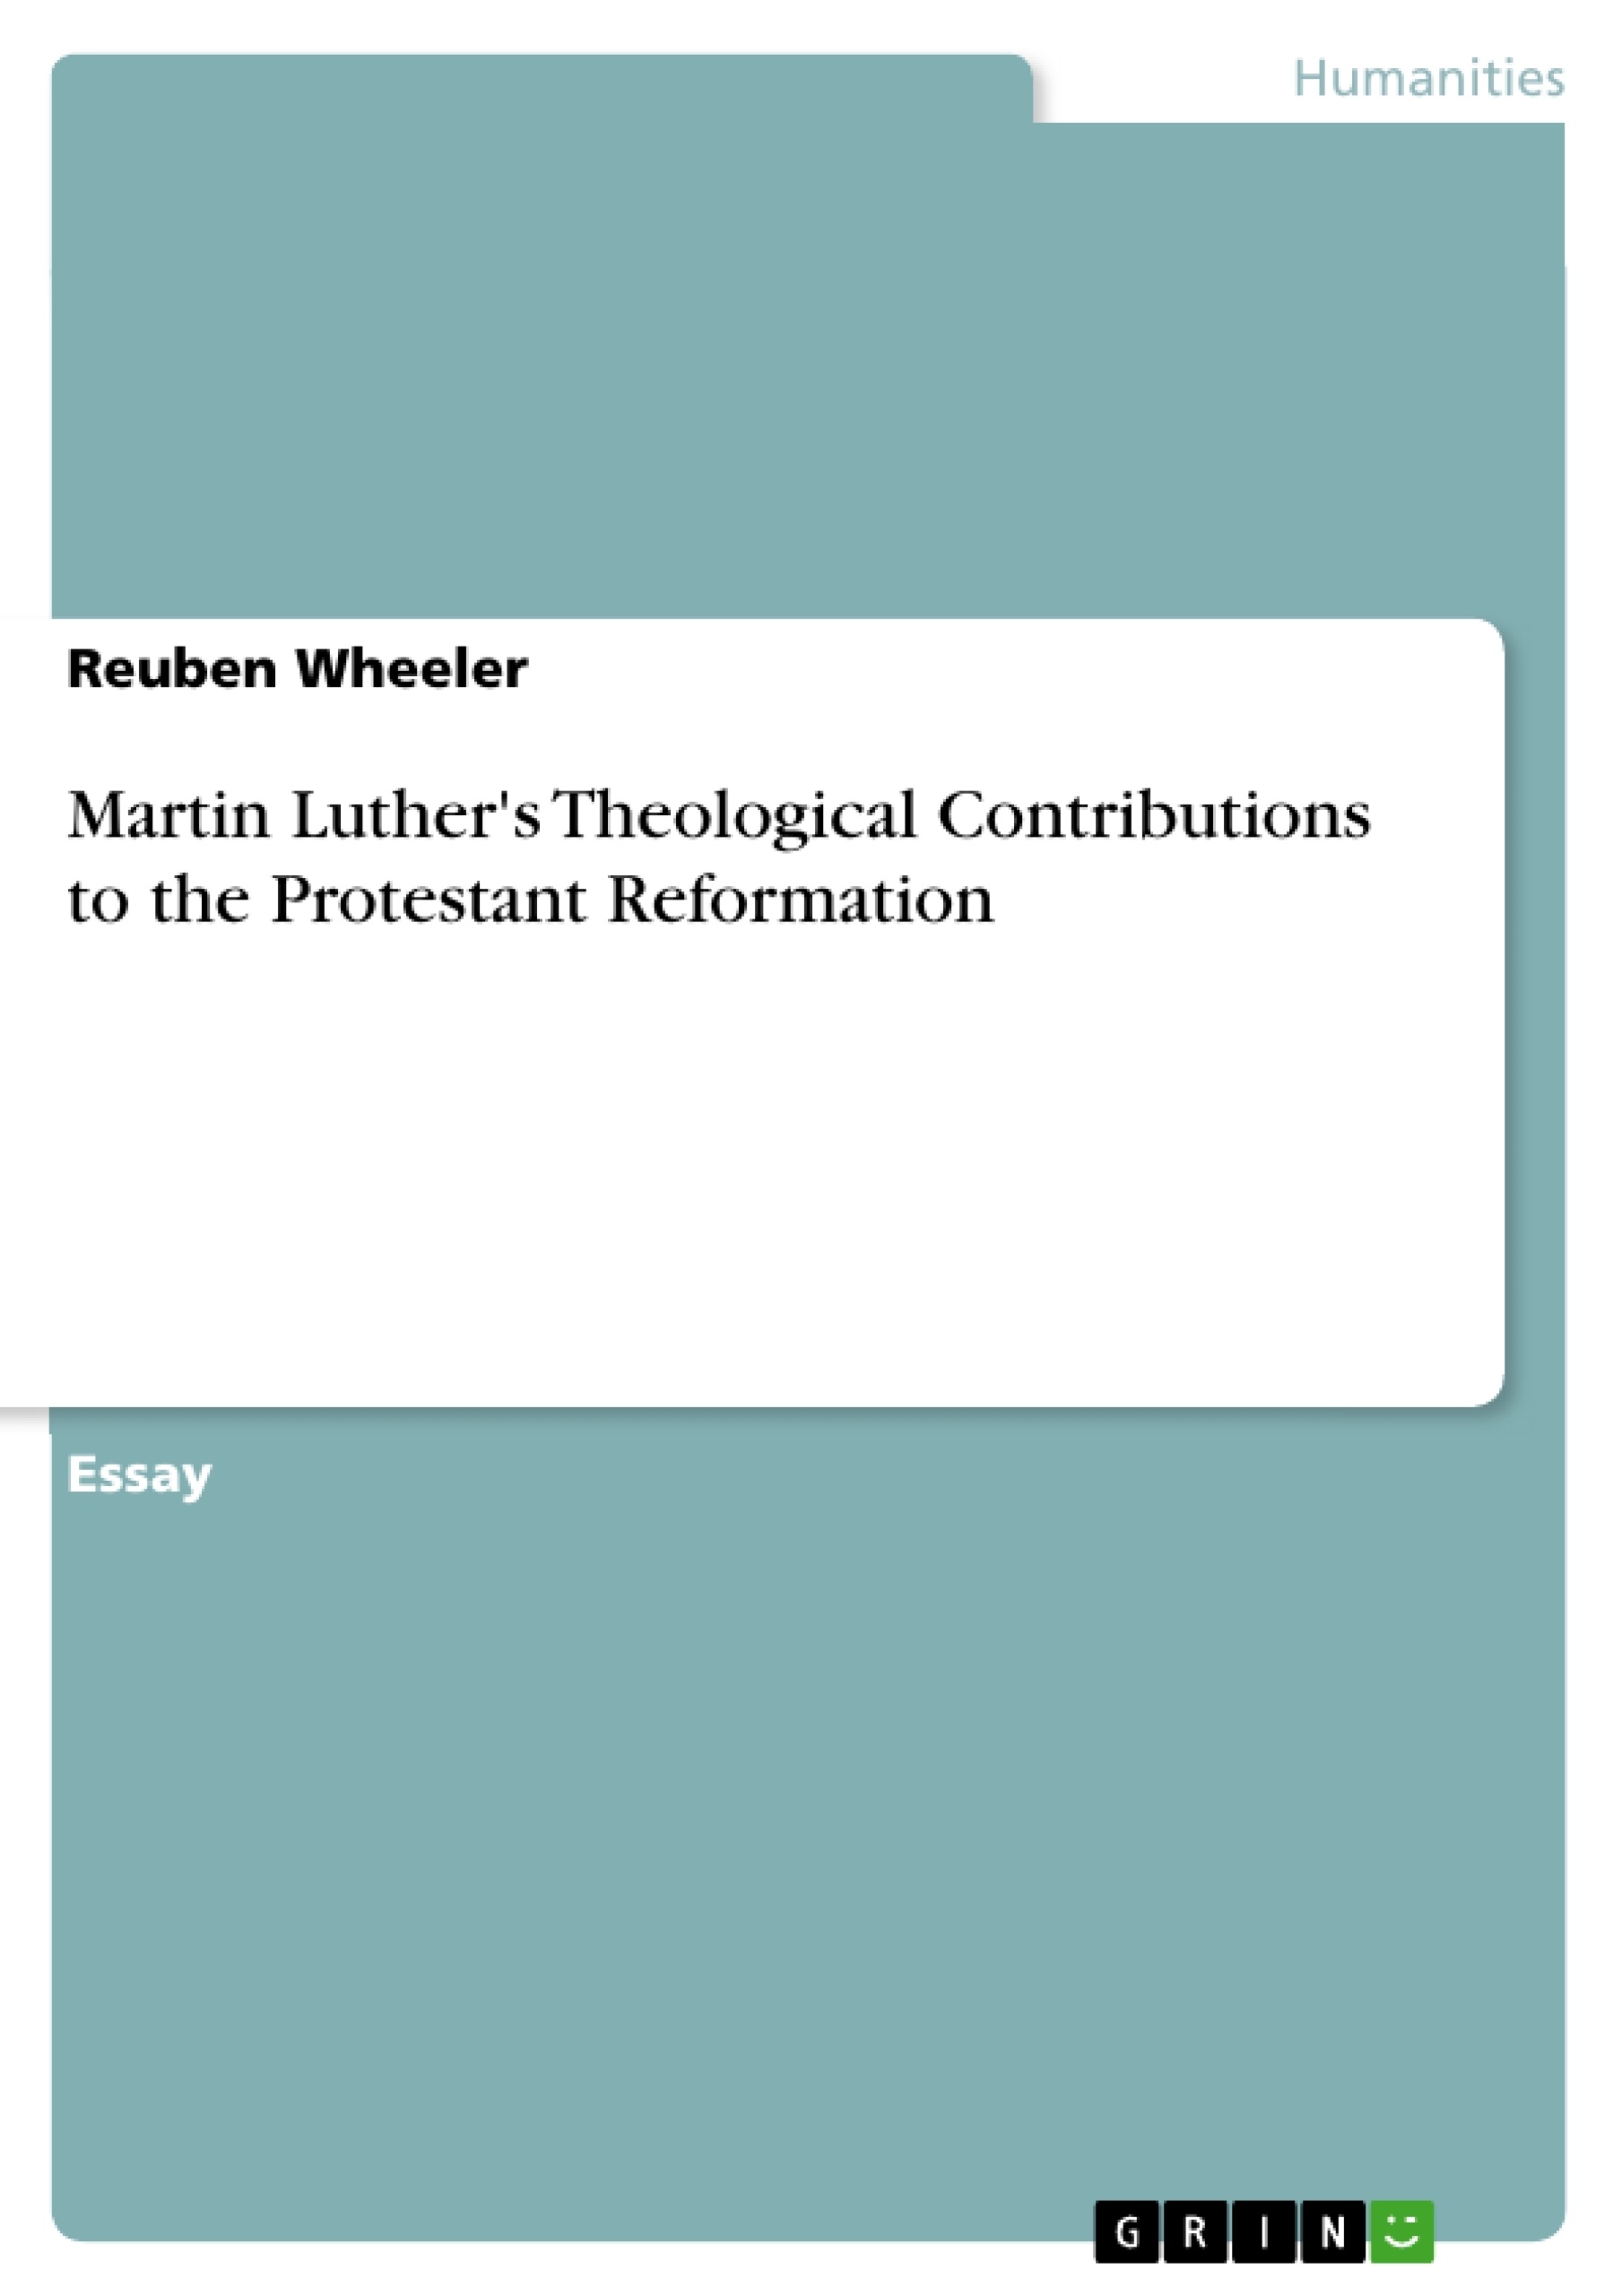 Title: Martin Luther's Theological Contributions to the Protestant Reformation